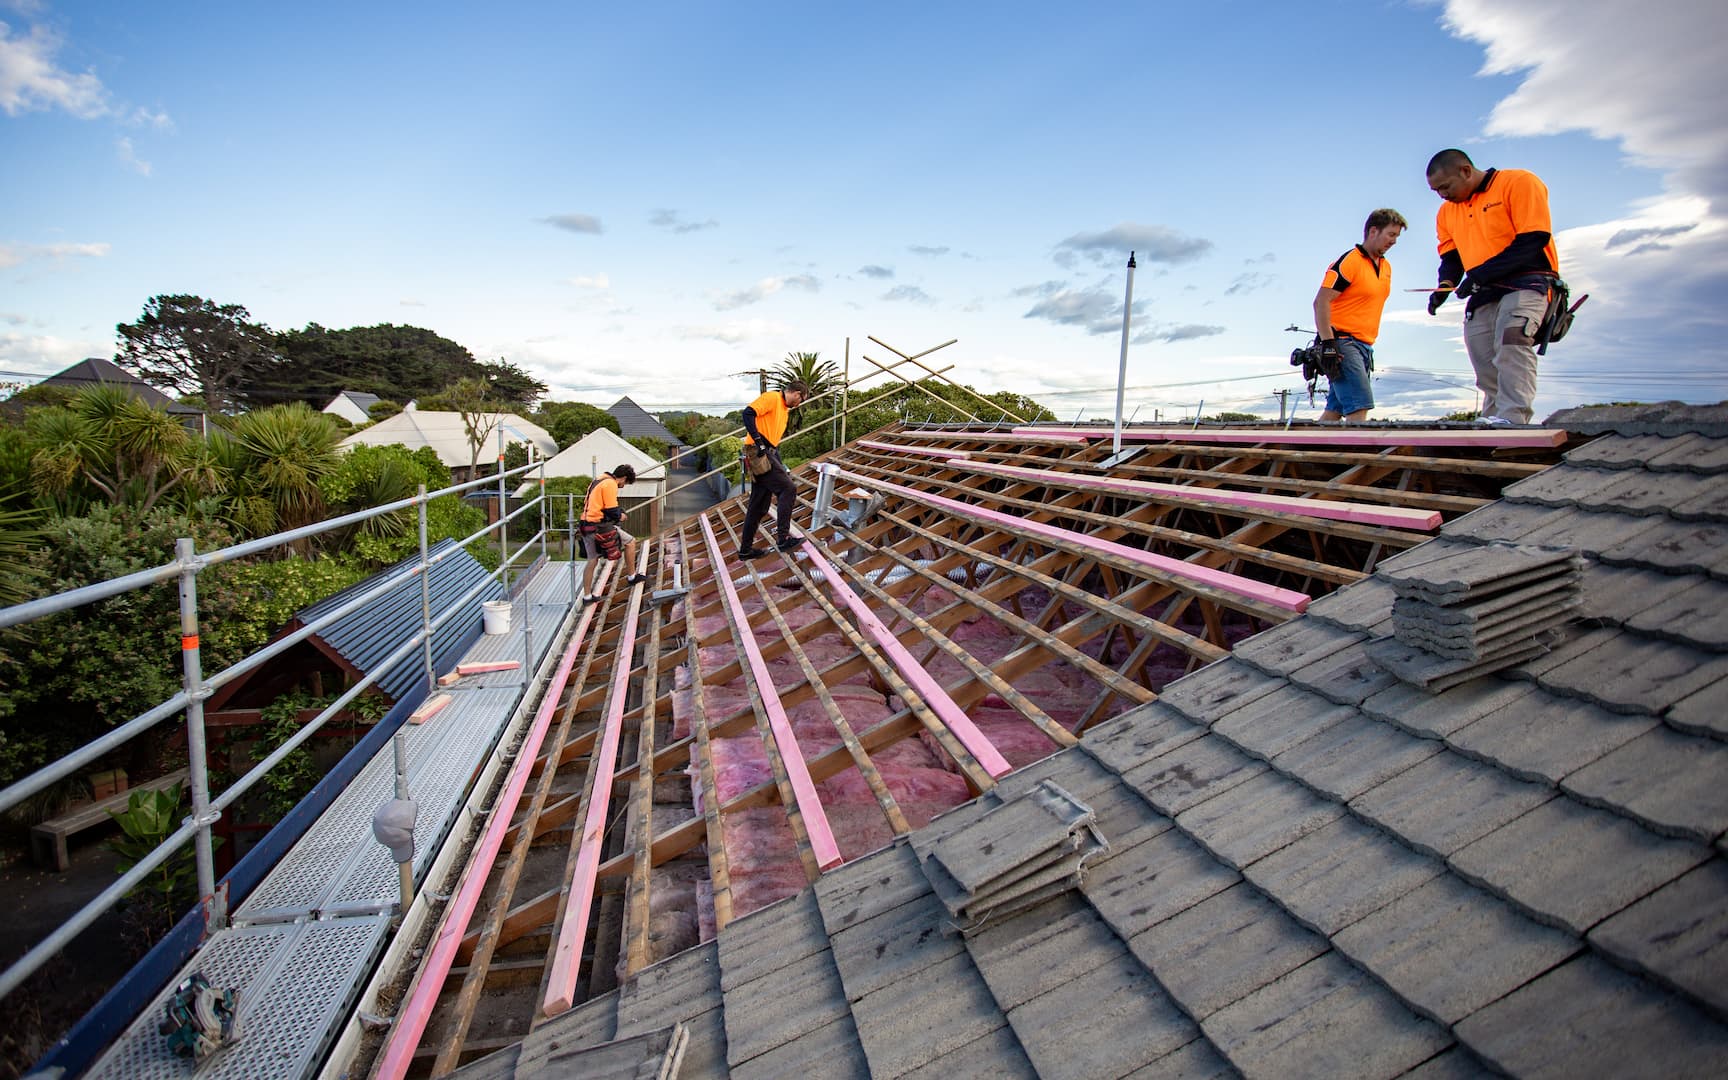 Workers installing roofing on a house: Skilled laborers diligently working on roof installation.